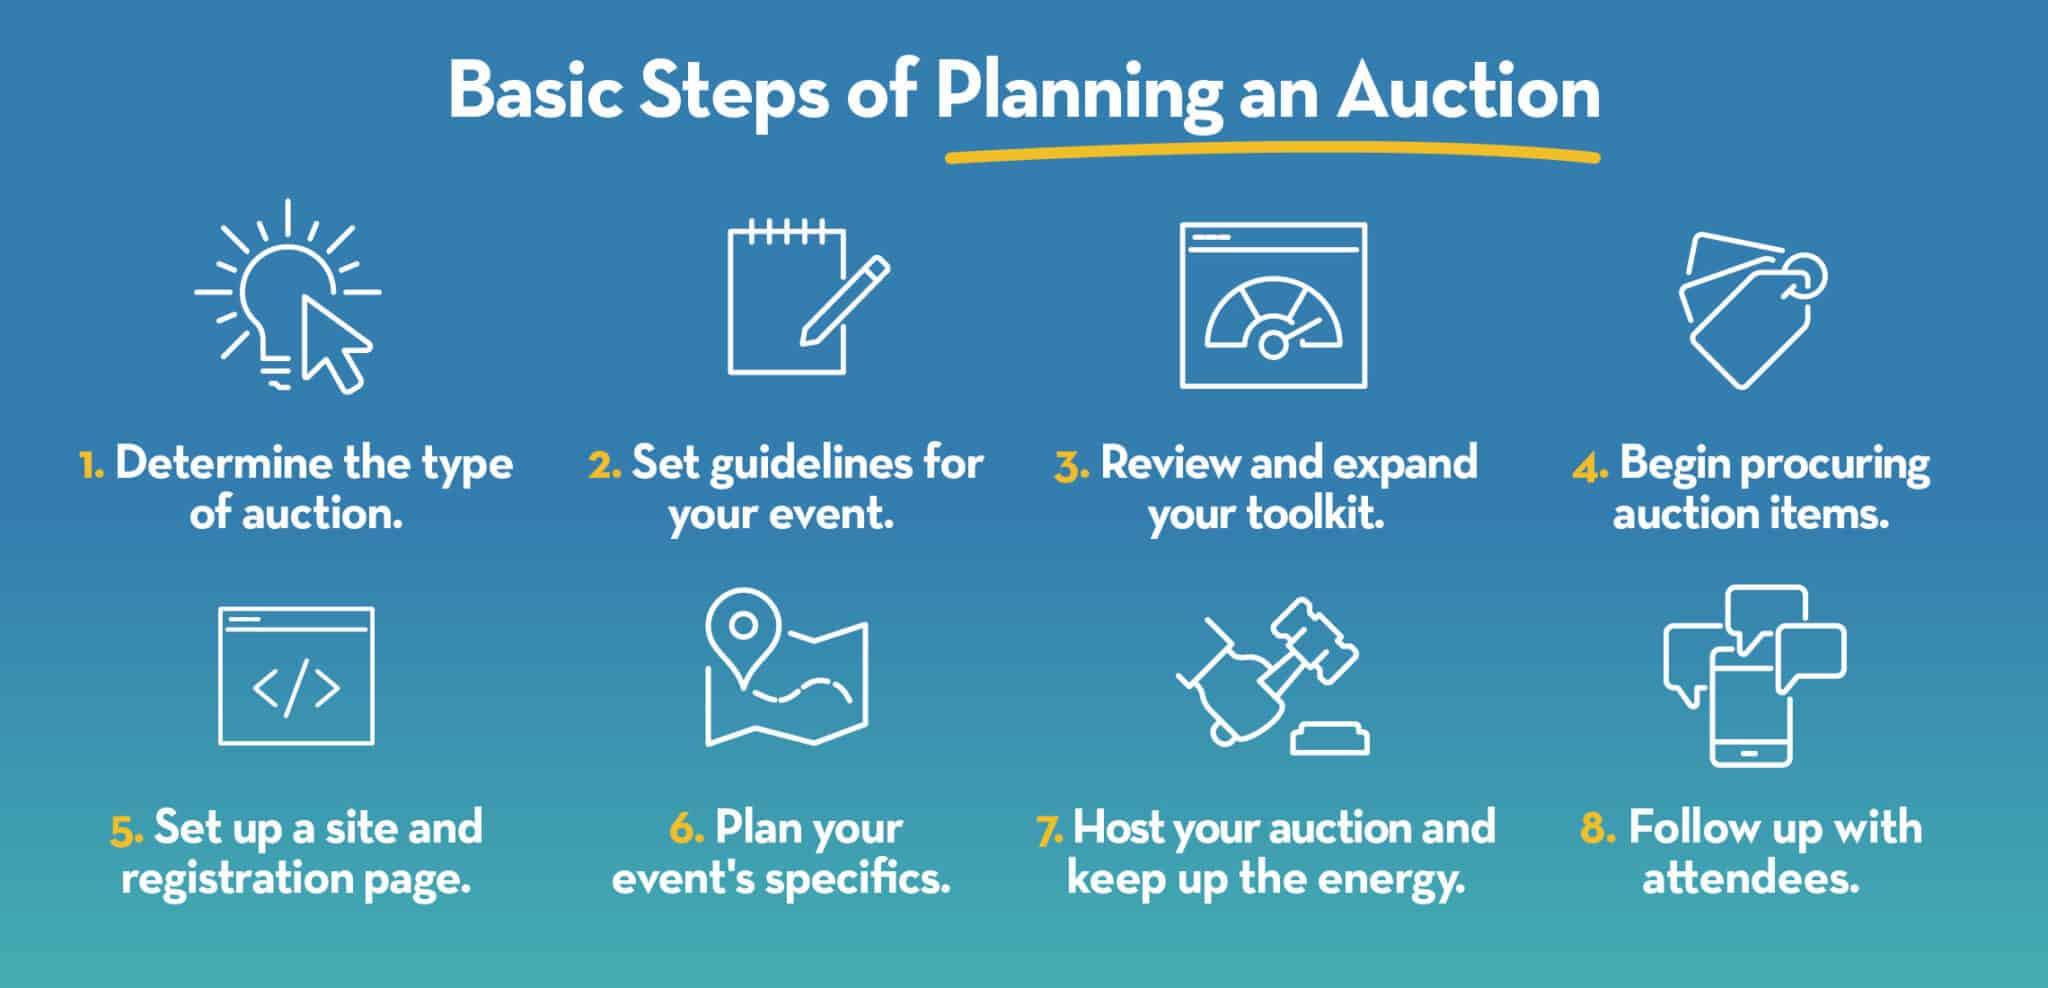 Charity Auctions  The Complete Guide for Nonprofits